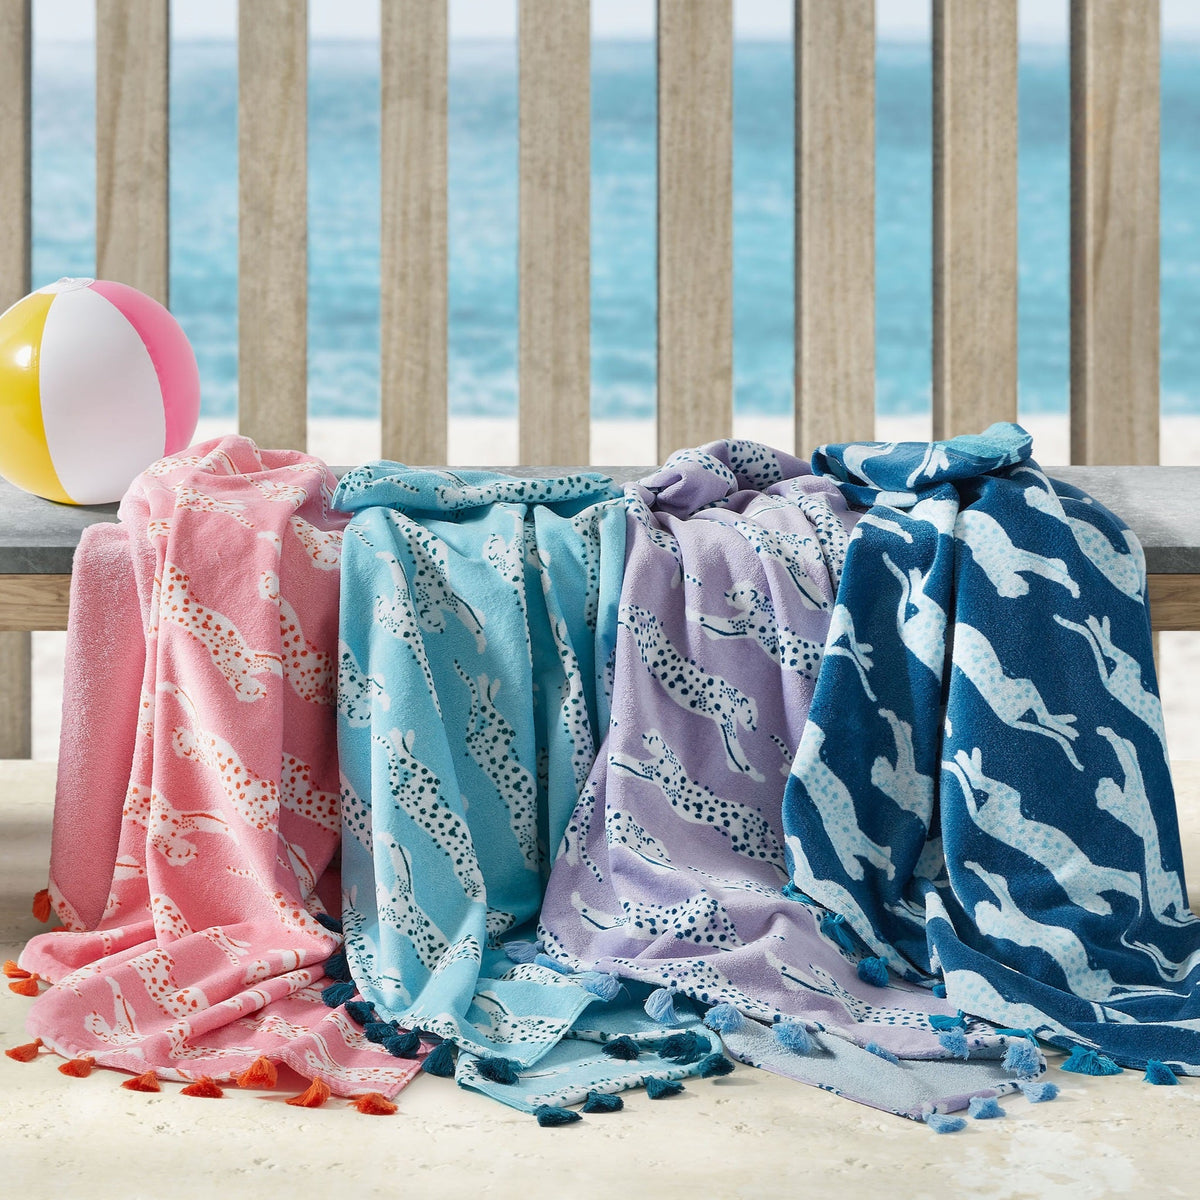 Lifestyle Image of Matouk Leaping Leopard Beach Towels on a Bench in Different Colors